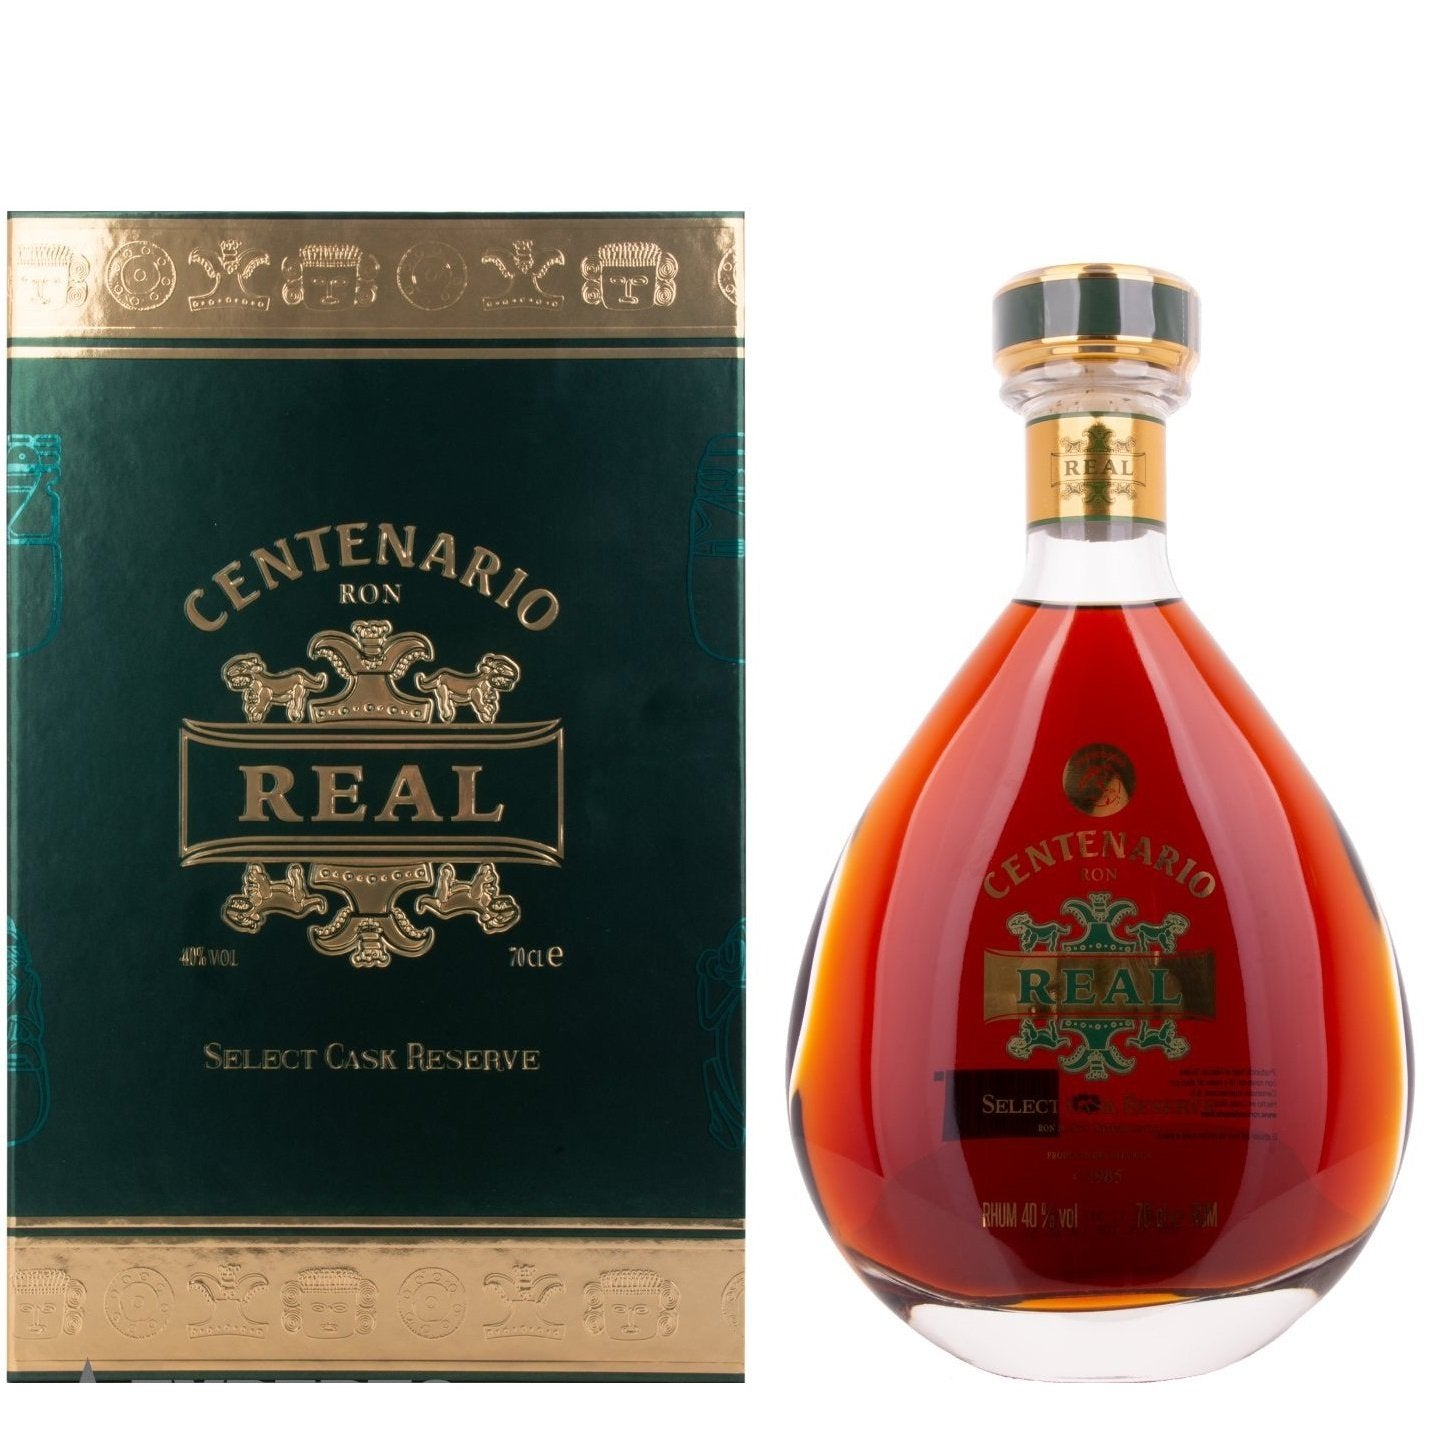 Cask Rum Centenario 40% 0,7 Reserve Edition Vol. Ron Old - Select REAL